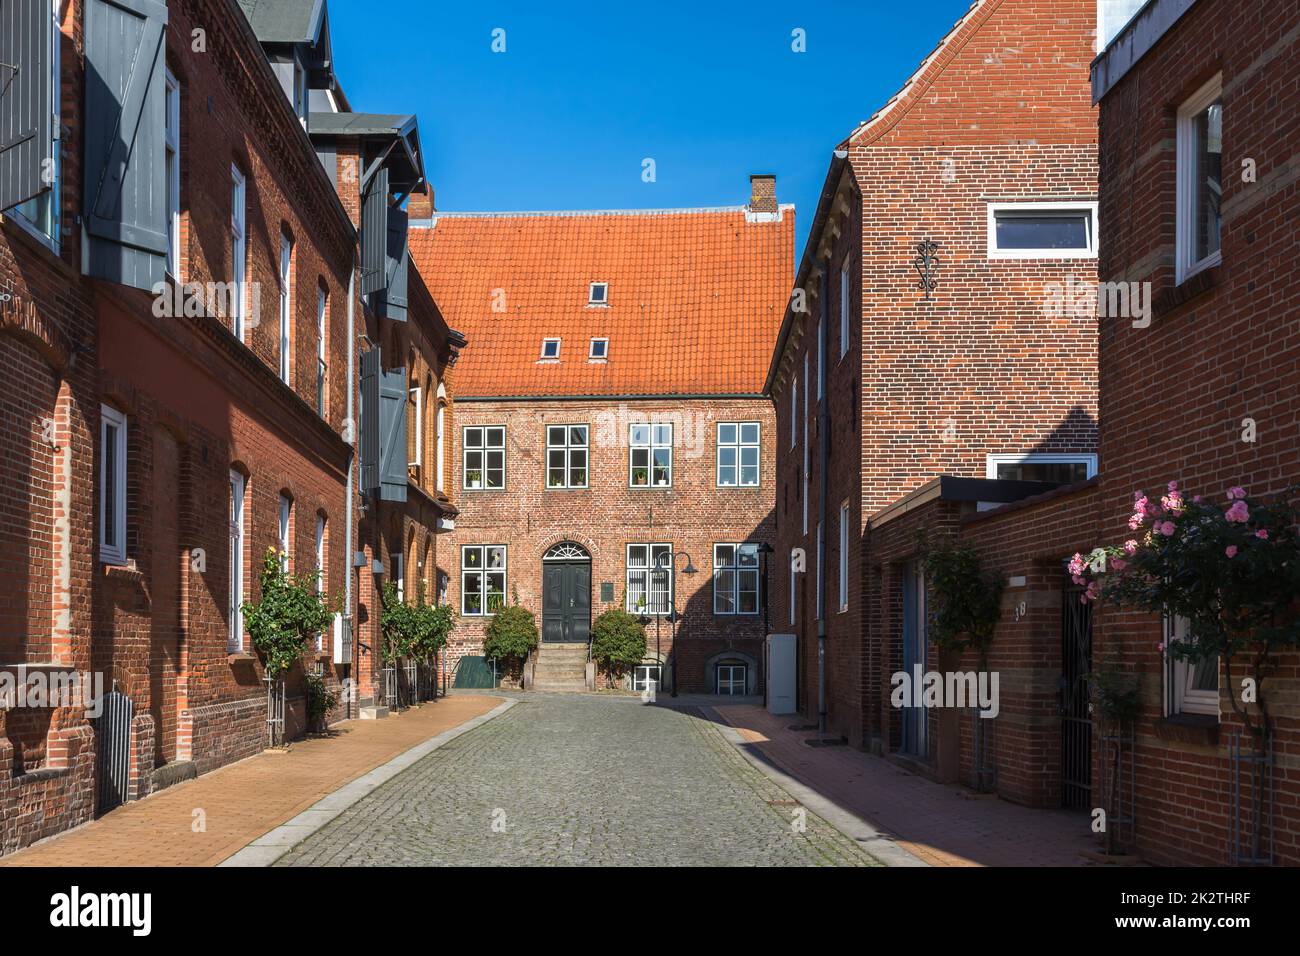 Public street with red brick buildings in Husum, North Frisia, Schleswig-Holstein, Germany Stock Photo